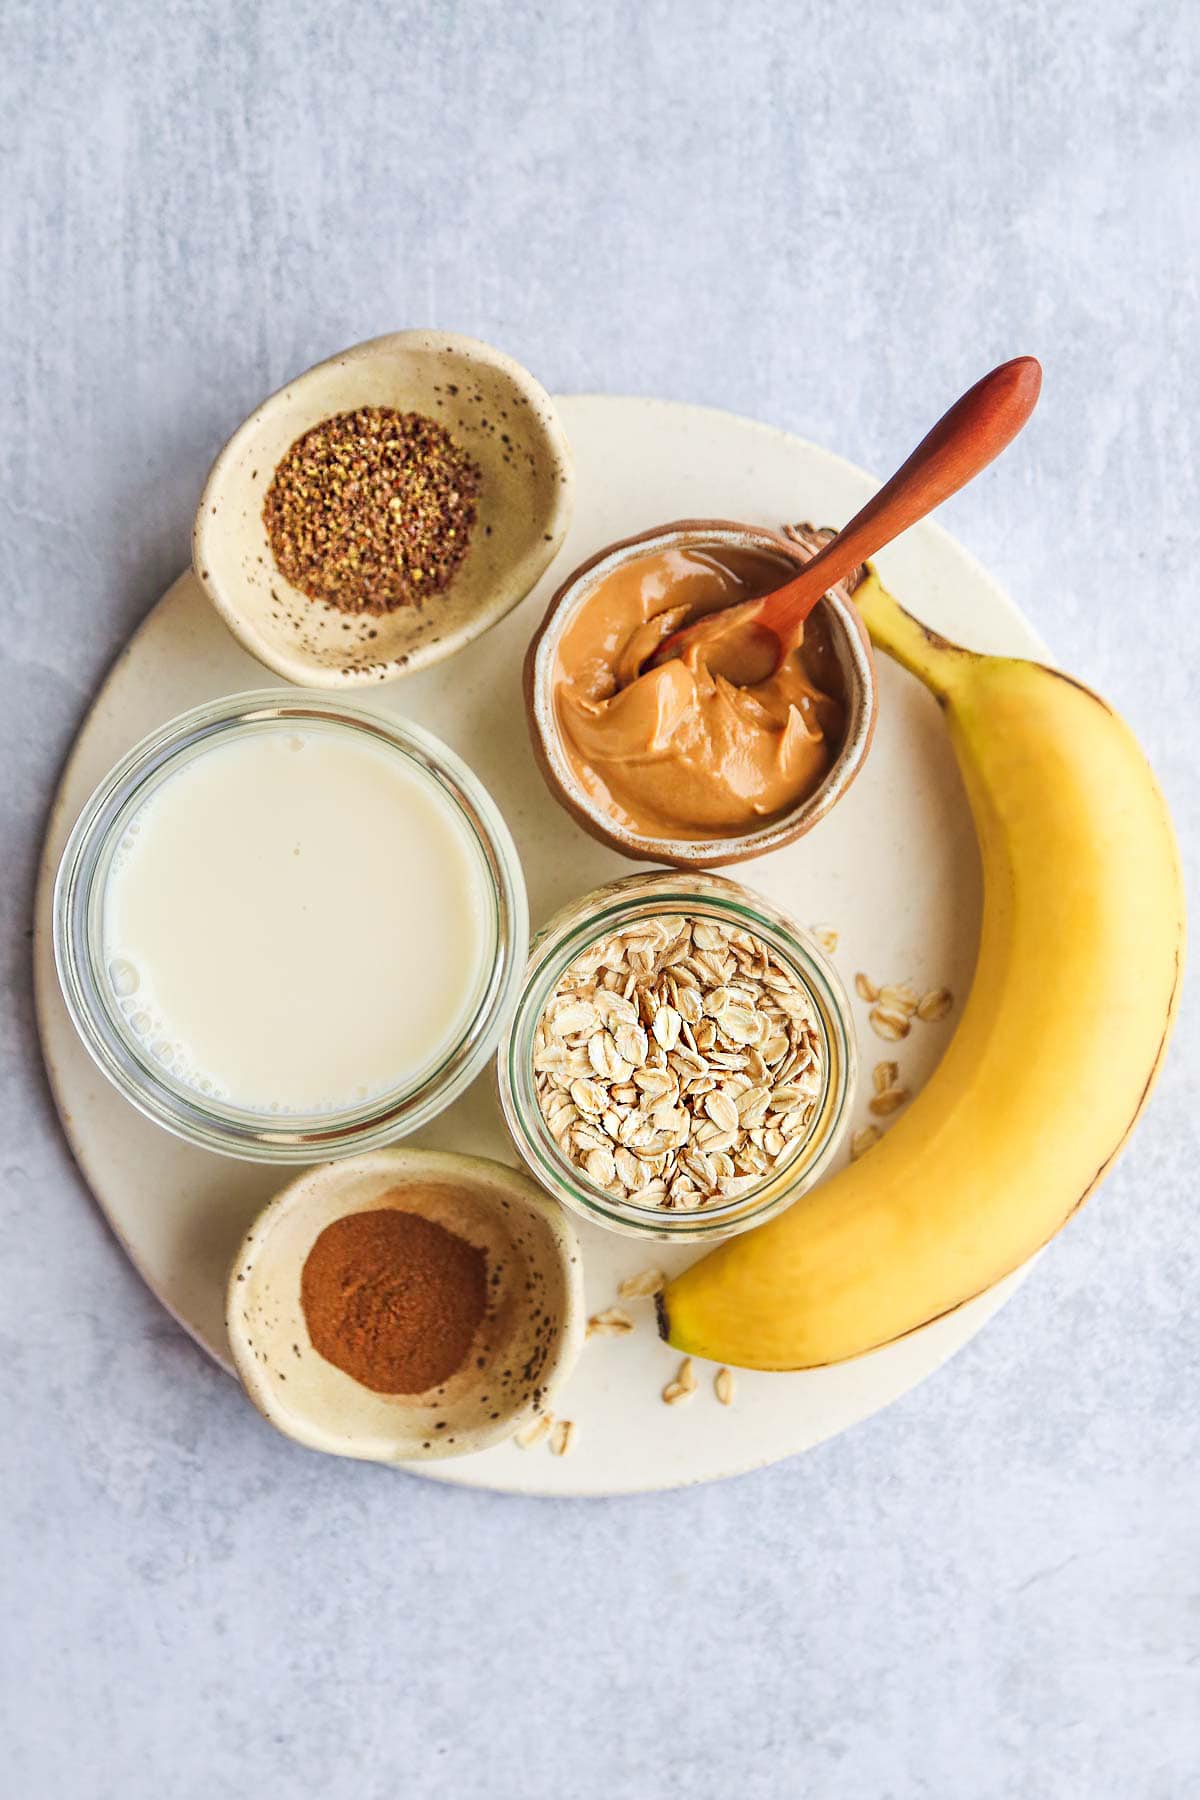 Banana oatmeal smoothie ingredients laid on a tray including a banana, peanut butter, cinnamon, almond milk, ground flaxseed, and oats